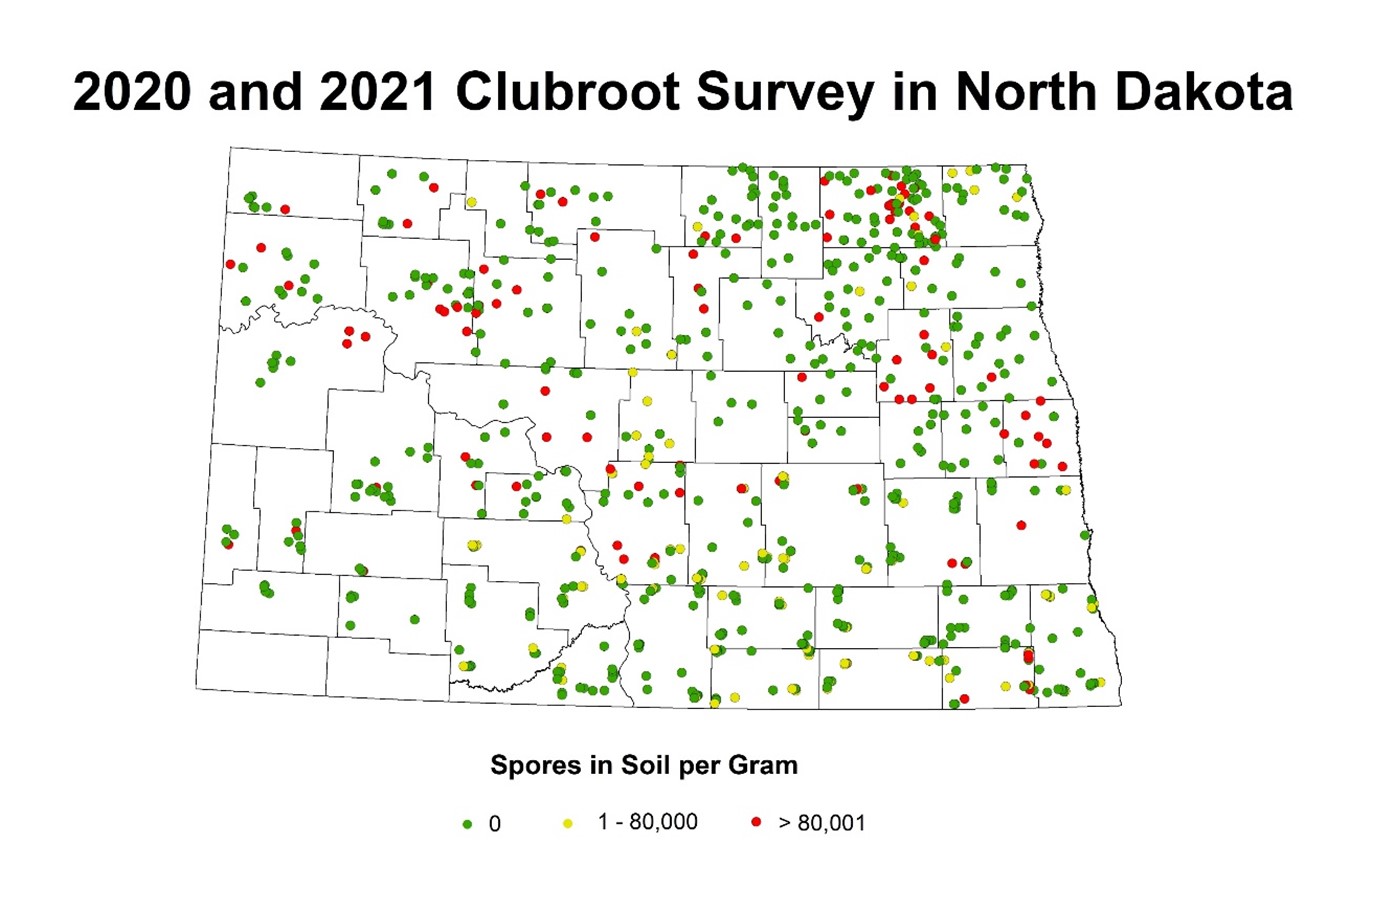 Map of North Dakota showing spores in soil per gram of clubroot prevalence in 2020 and 2021.